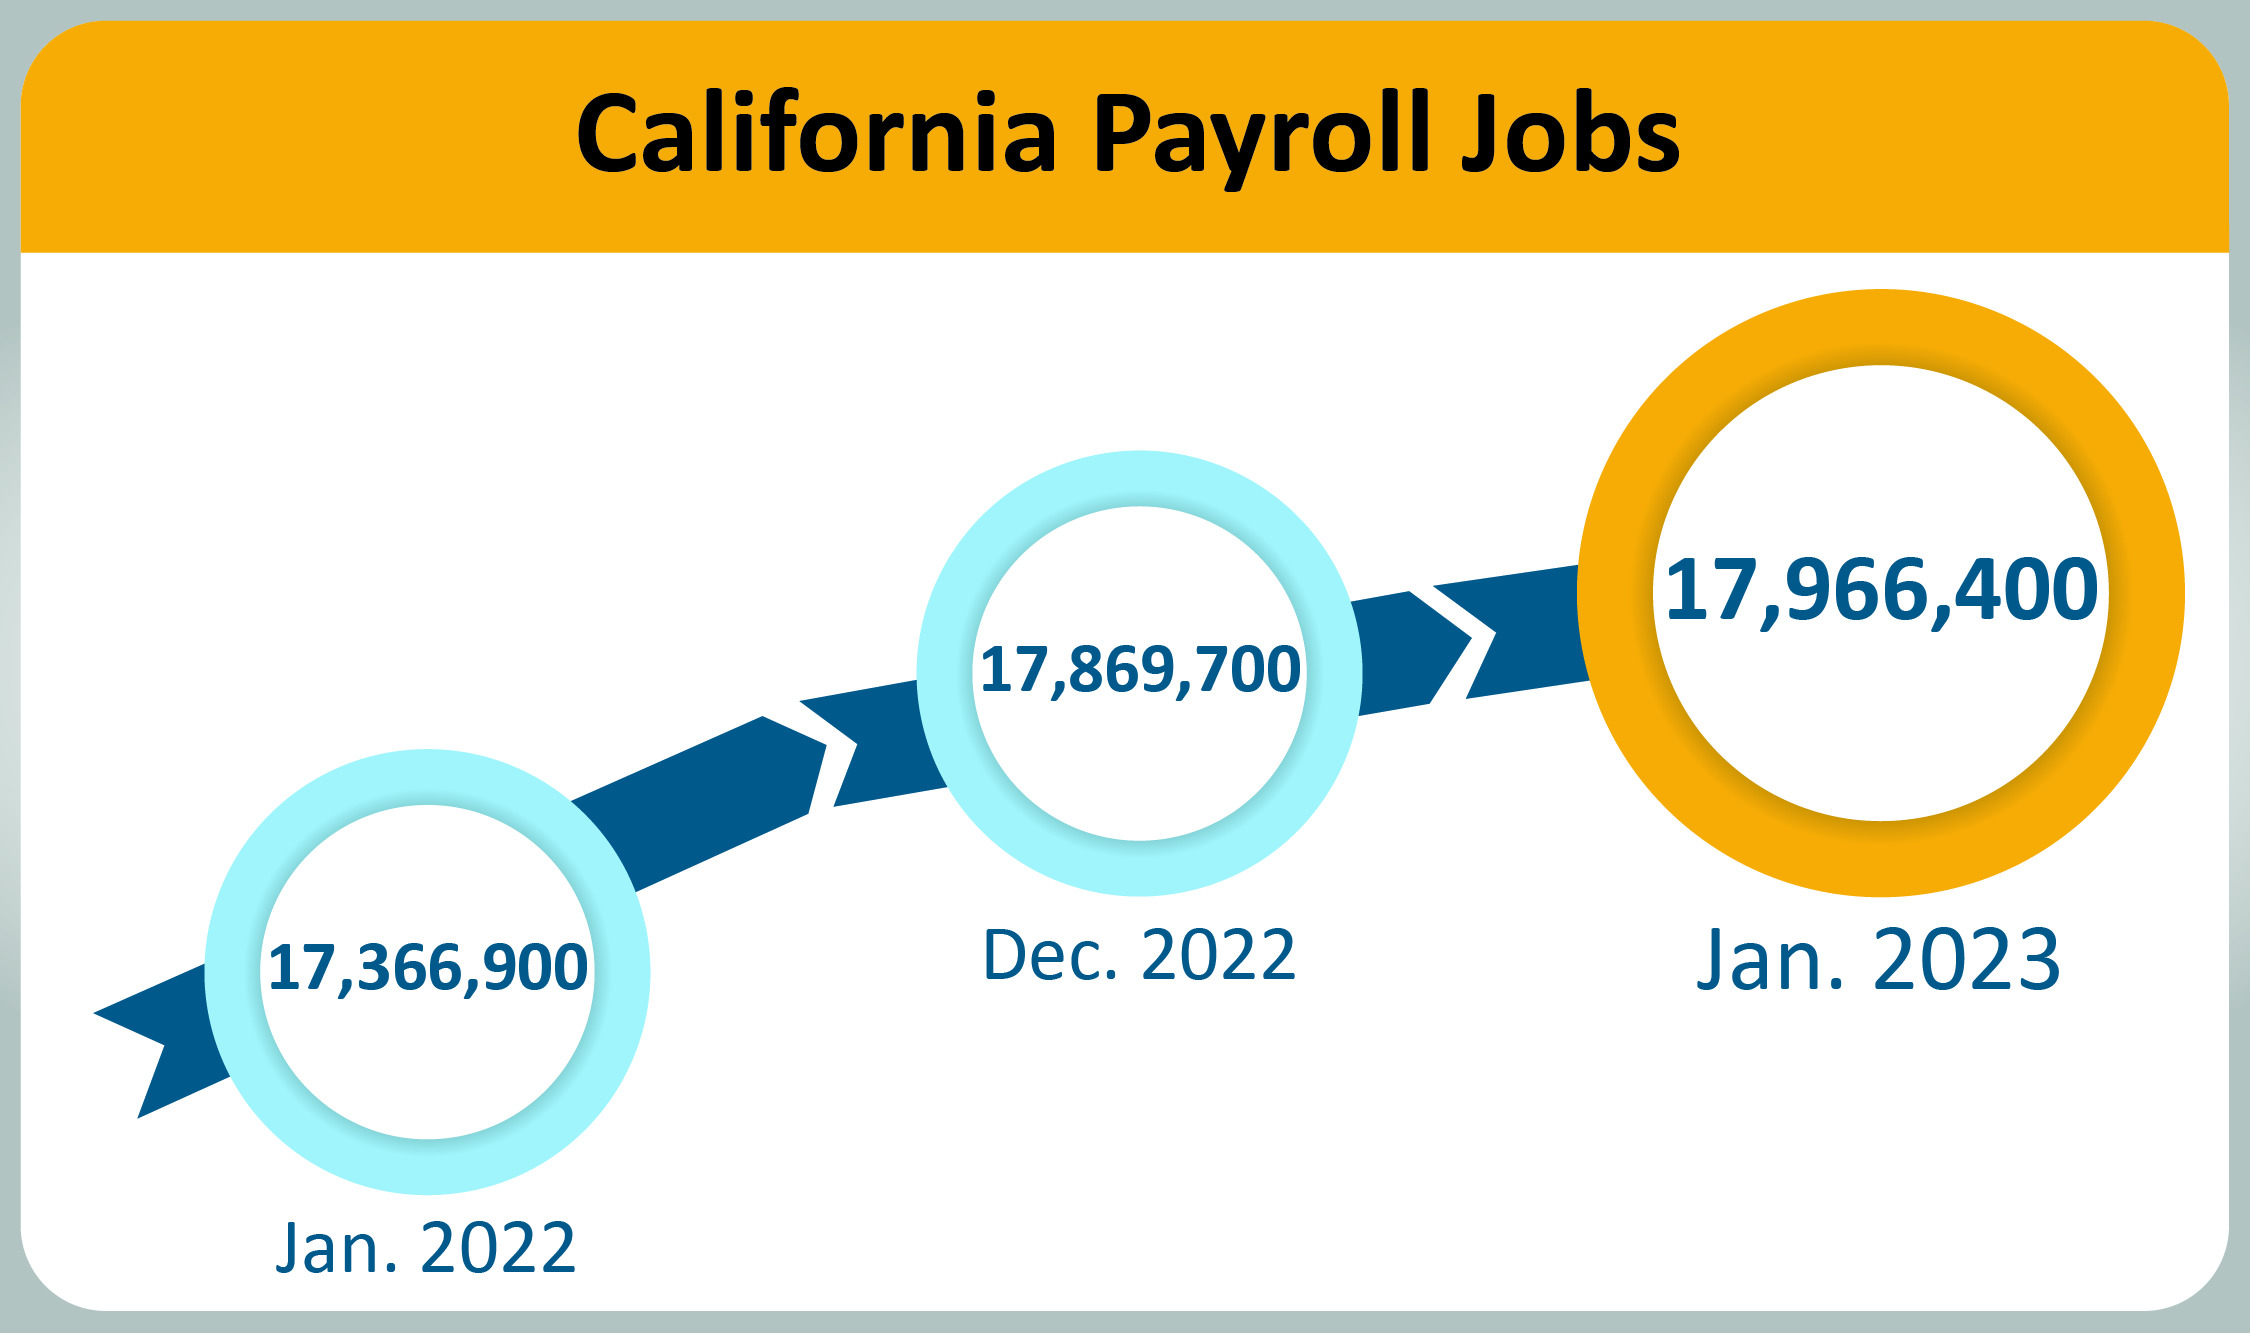 California payroll jobs totaled 17,996,400 in January 2023, up 96,700 from December 2022 and up 599,500 from January of last year.